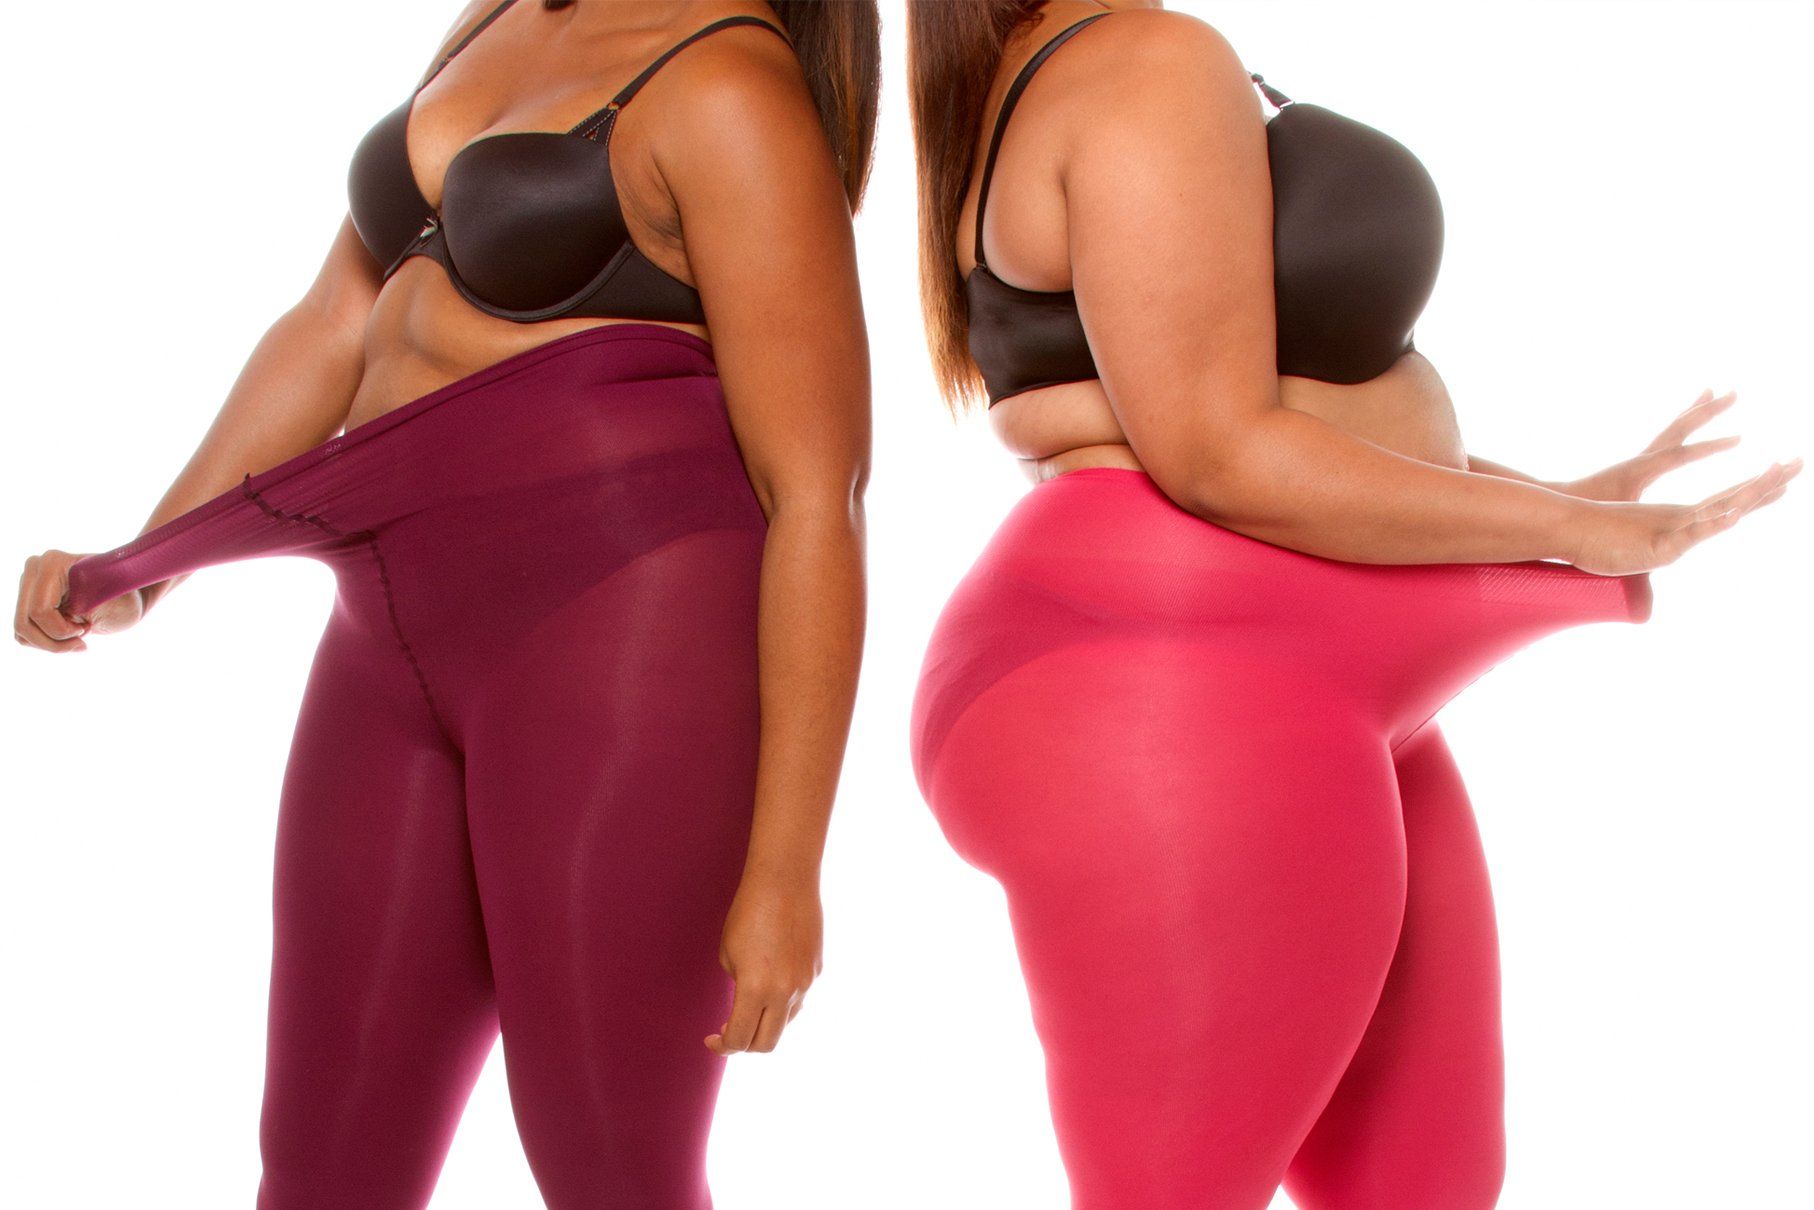 Sonsee Hosiery - Perfect for the fuller figure. - Curvy